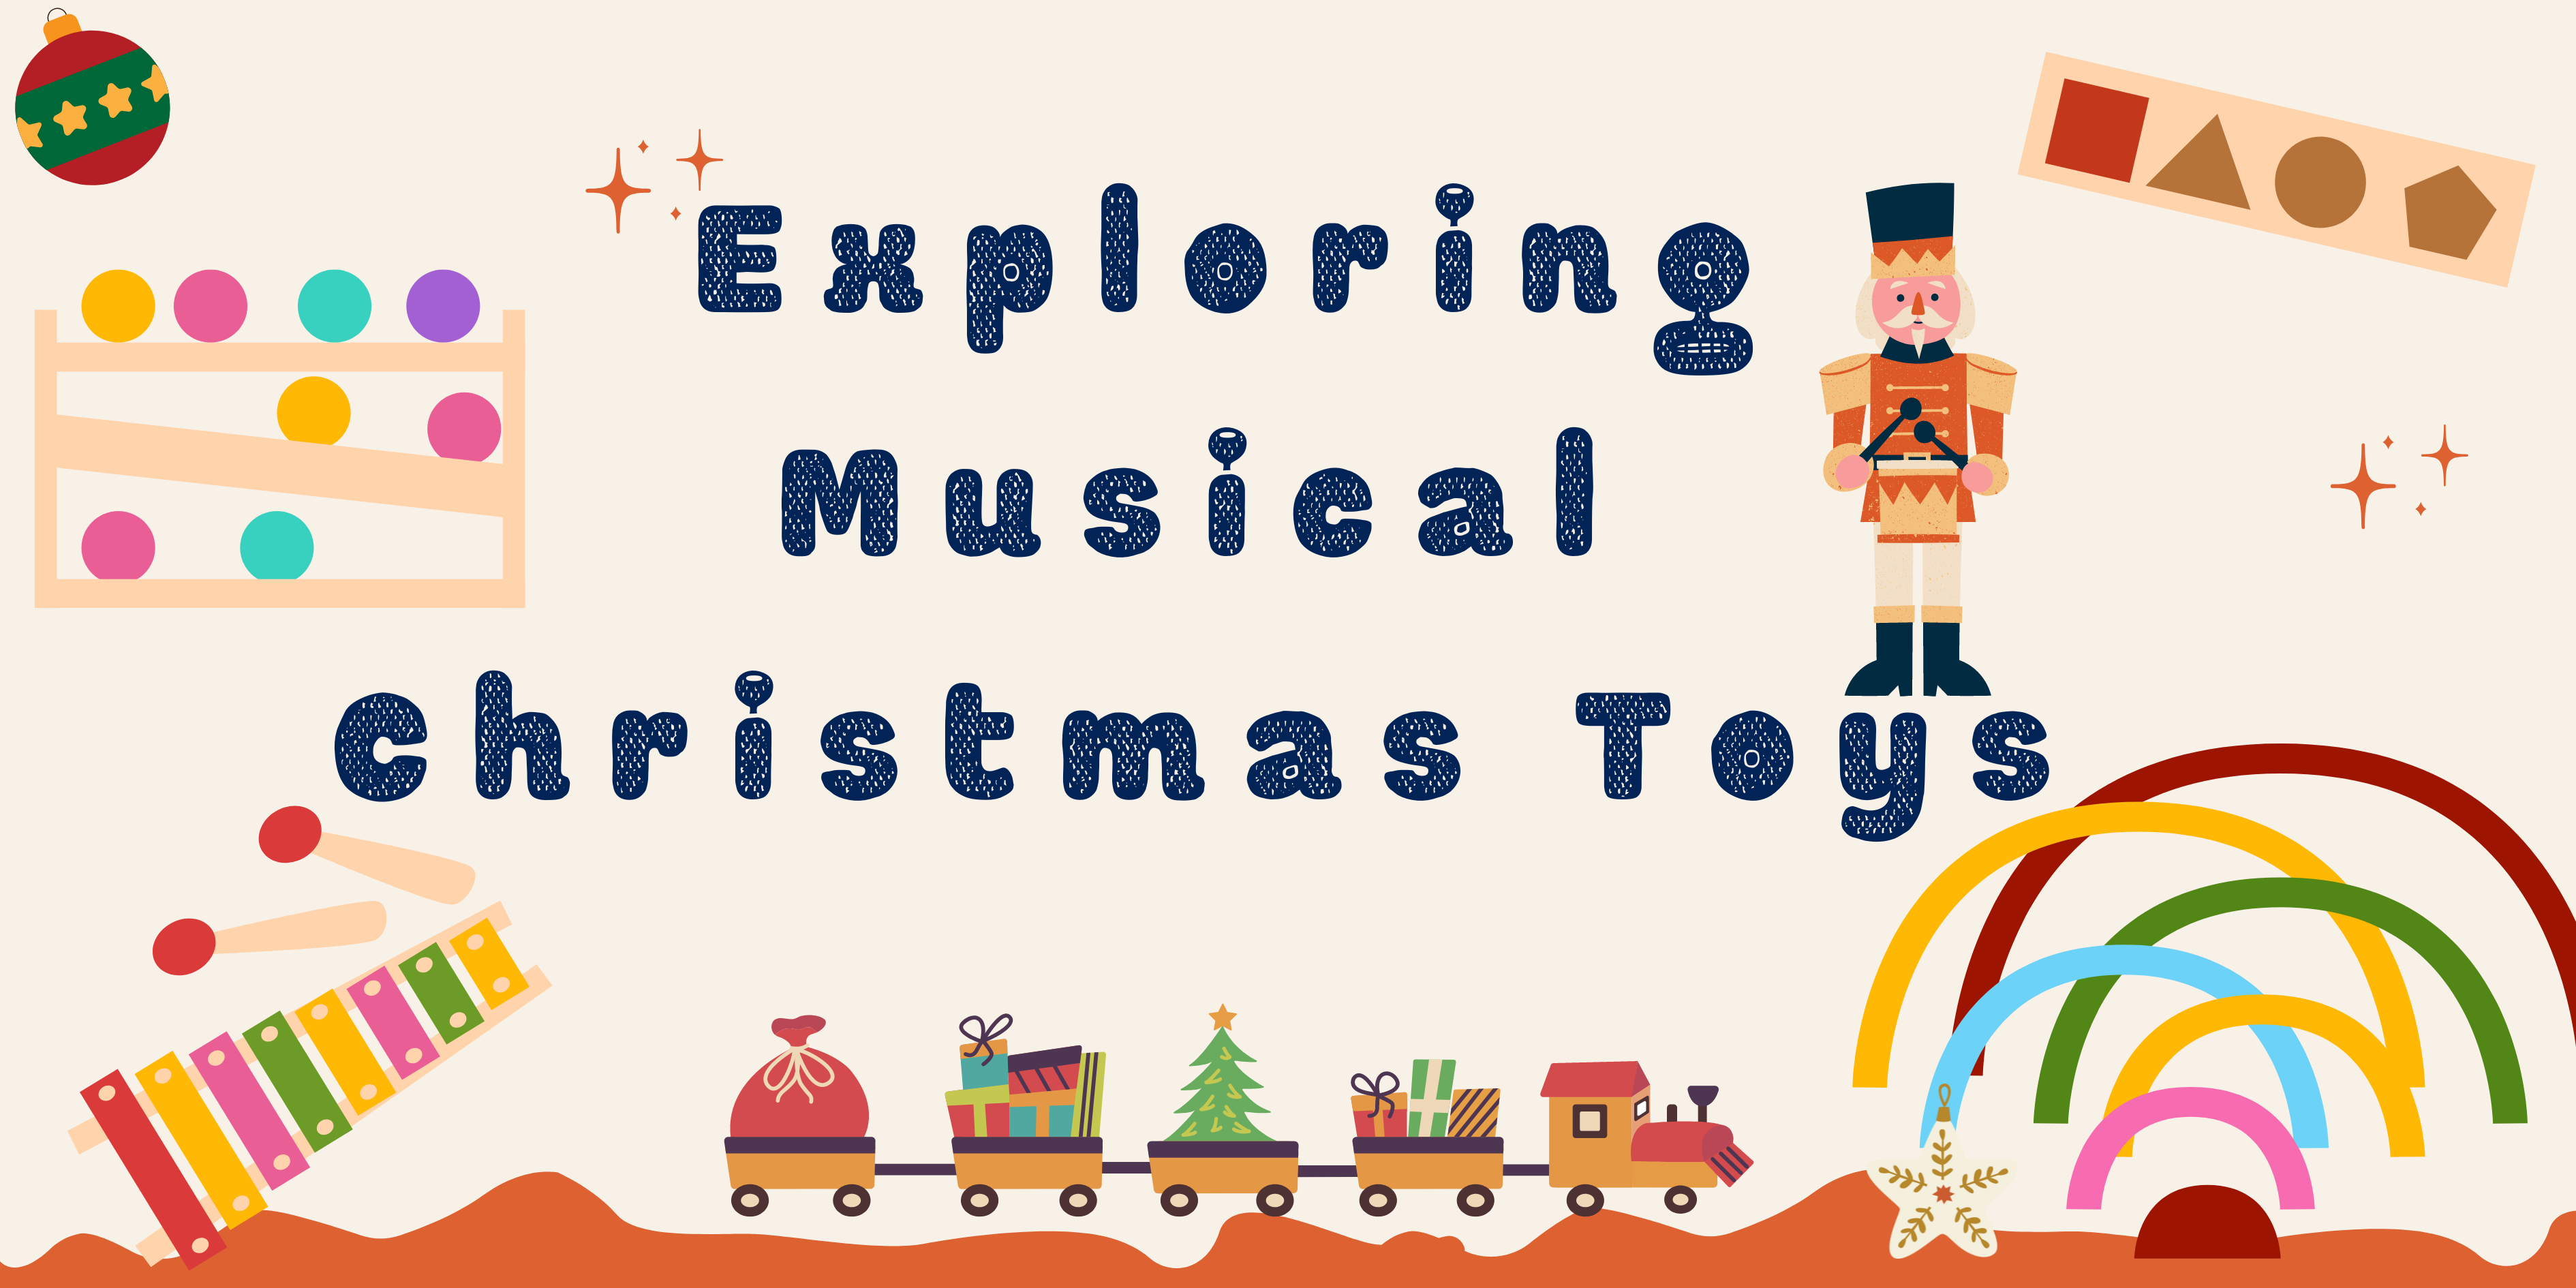 Musical Christmas Toys on Early Childhood Development: An Exploratory Study